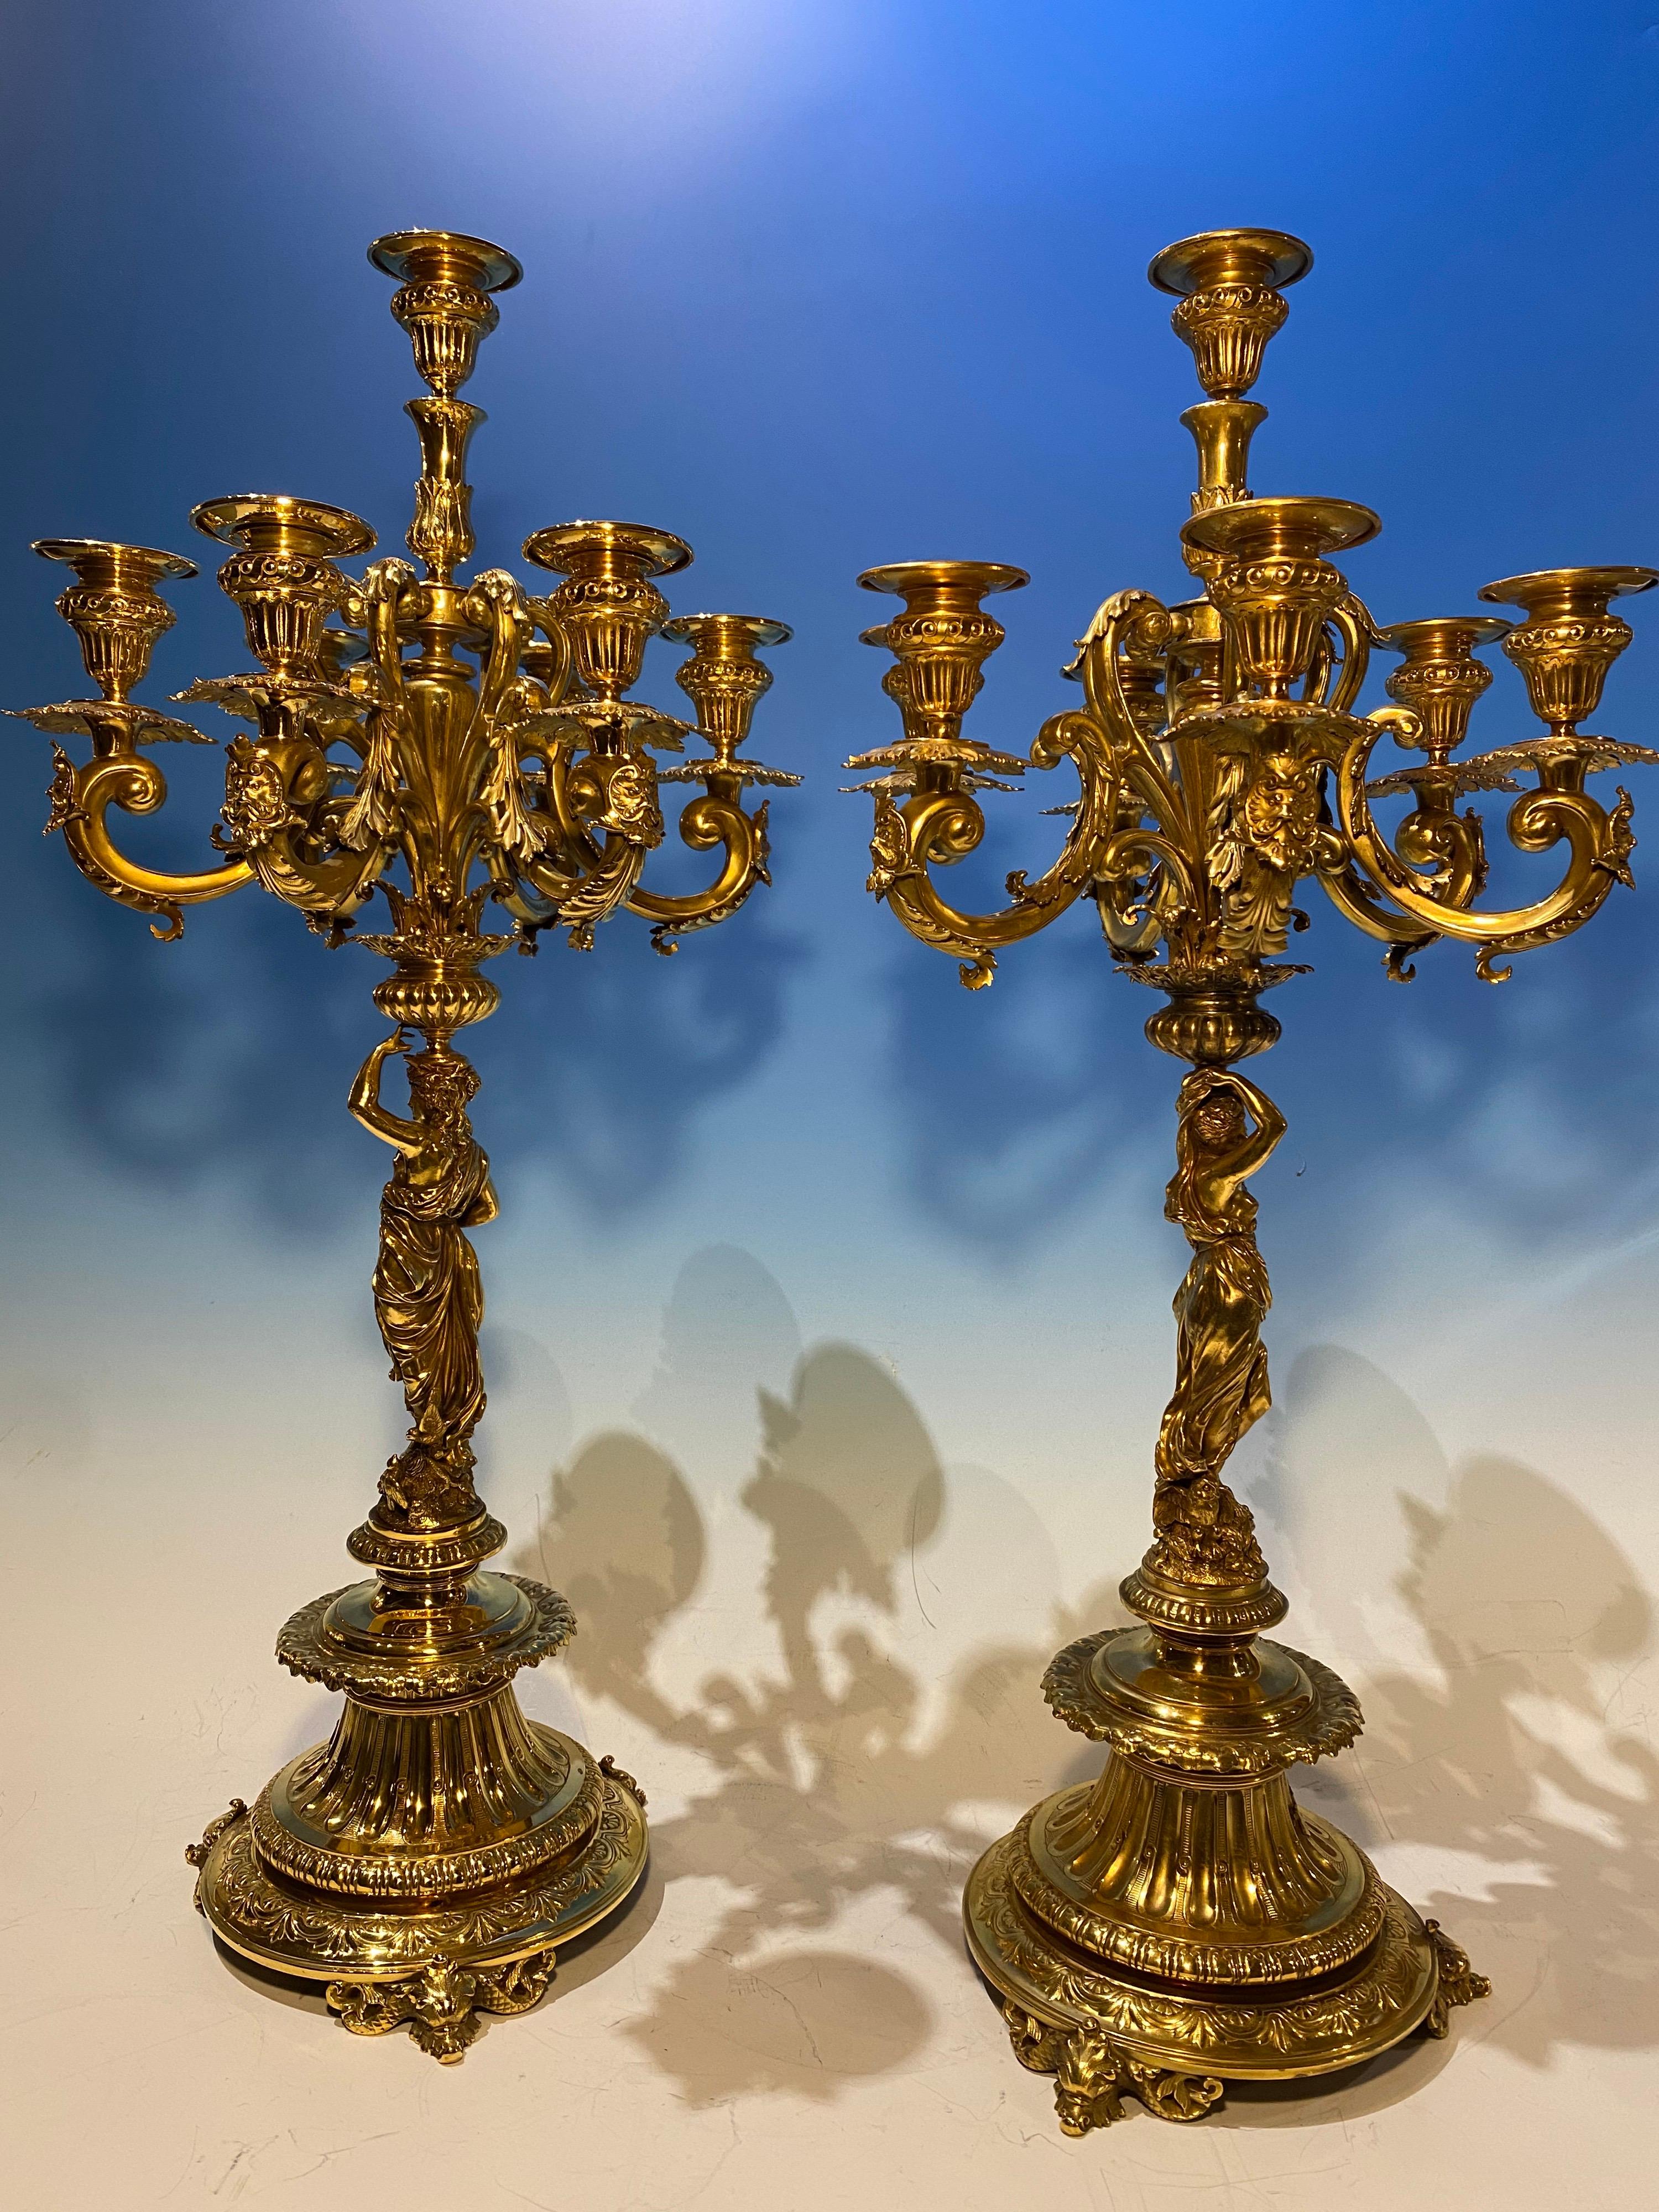 An exceptional pair of Austrian neoclassical style silver gilt six light figural candelabra A.D. Hauptmann & Co., Vienna late 19th/early 20th century. Each candelabra having a figural fully robed women with a dove and/or an owl by their feet. The